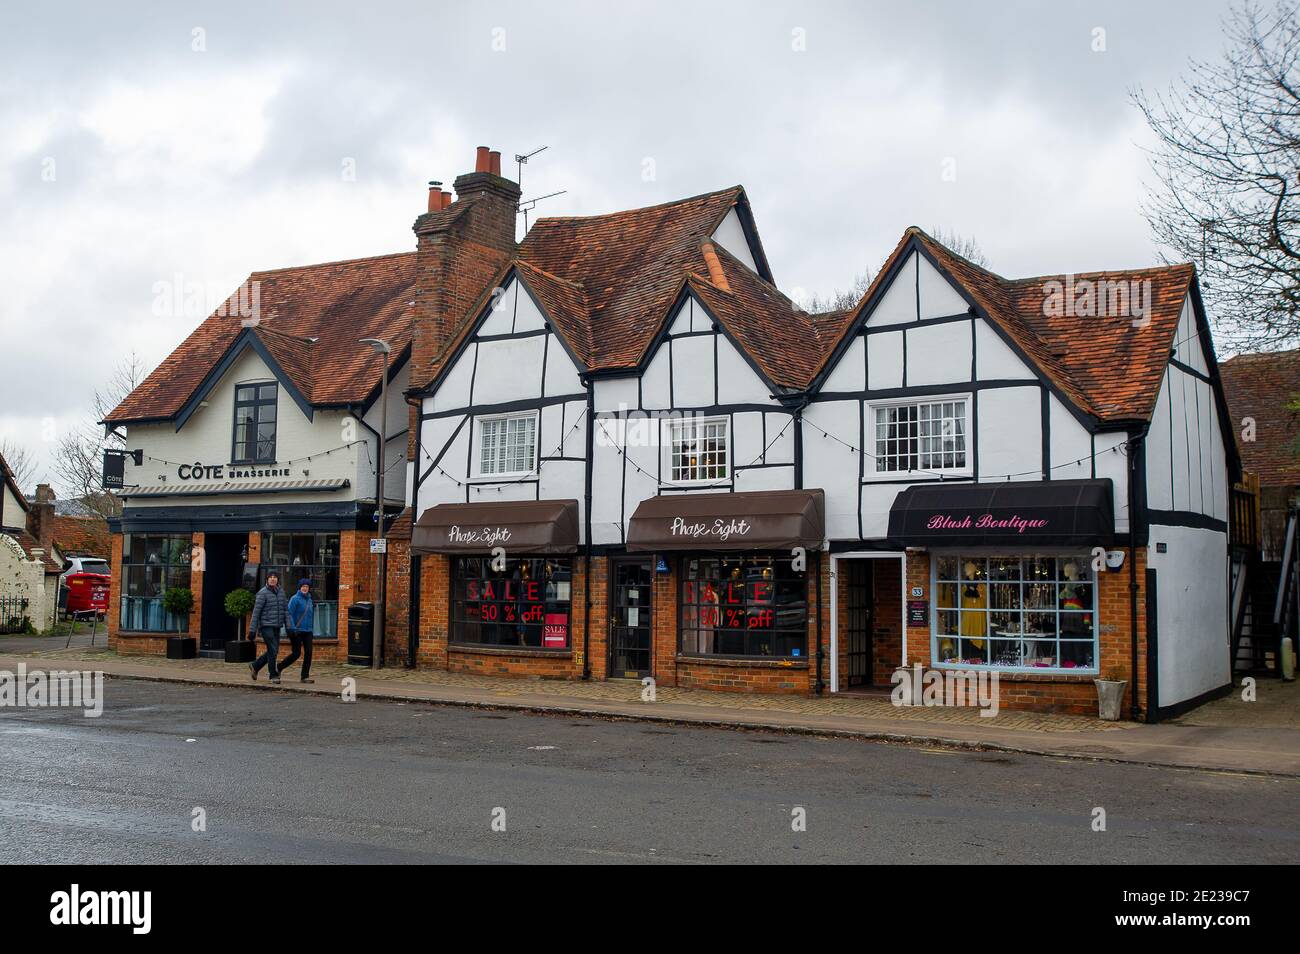 Old Amersham, Buckinghamshire, UK. 11th January, 2021. Closed restaurants and shops. Amersham Old Town was very quiet today as many people heed the Government requirement to stay at home during the latest Covid-19 lockdown. Credit: Maureen McLean/Alamy Stock Photo